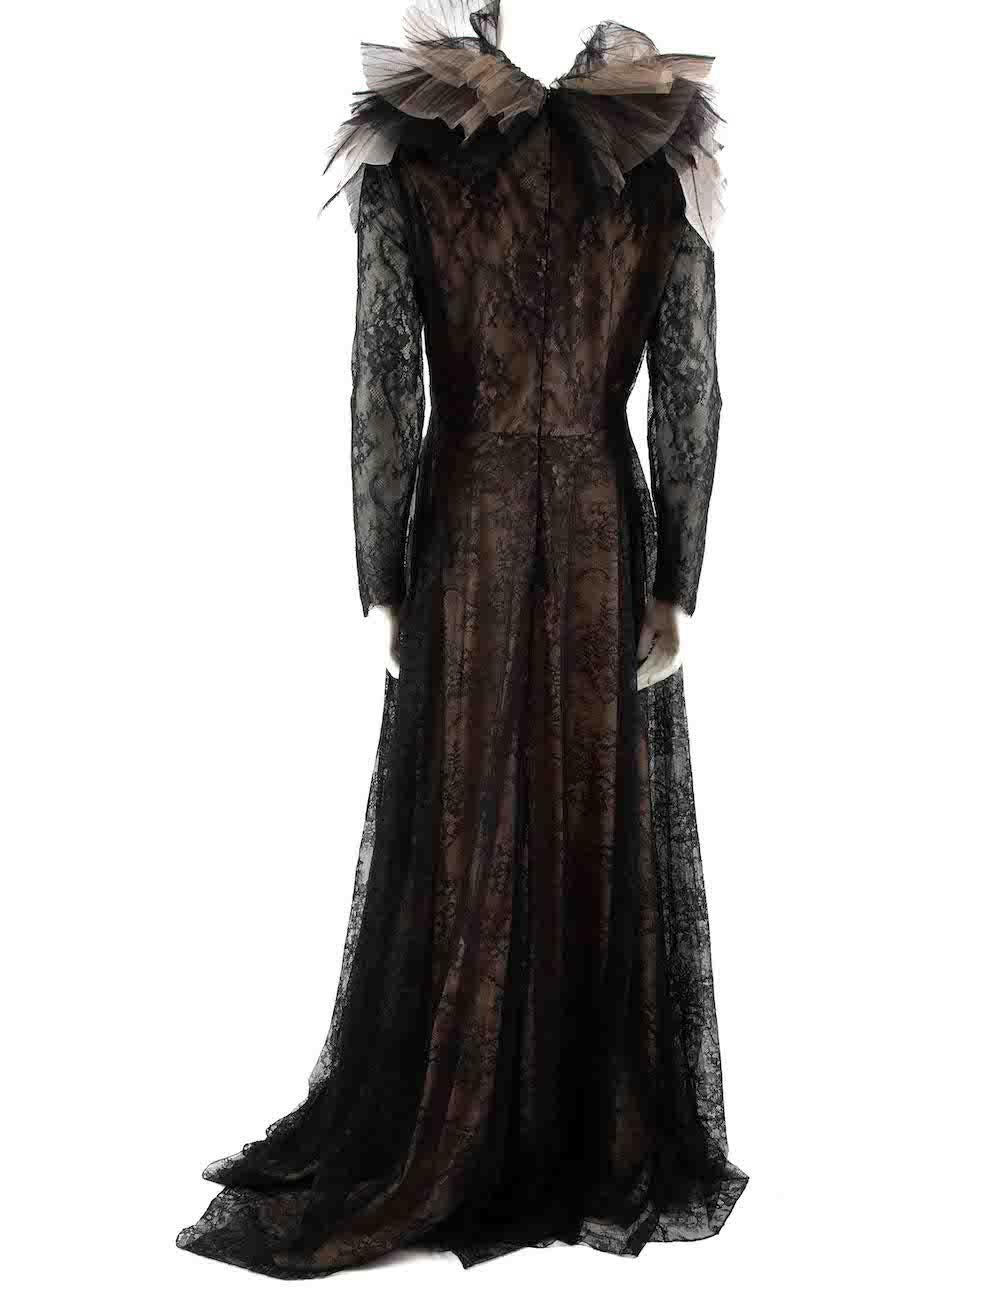 Honayda Black Lace Ruffle Neck Maxi Dress Size XXL In Good Condition For Sale In London, GB